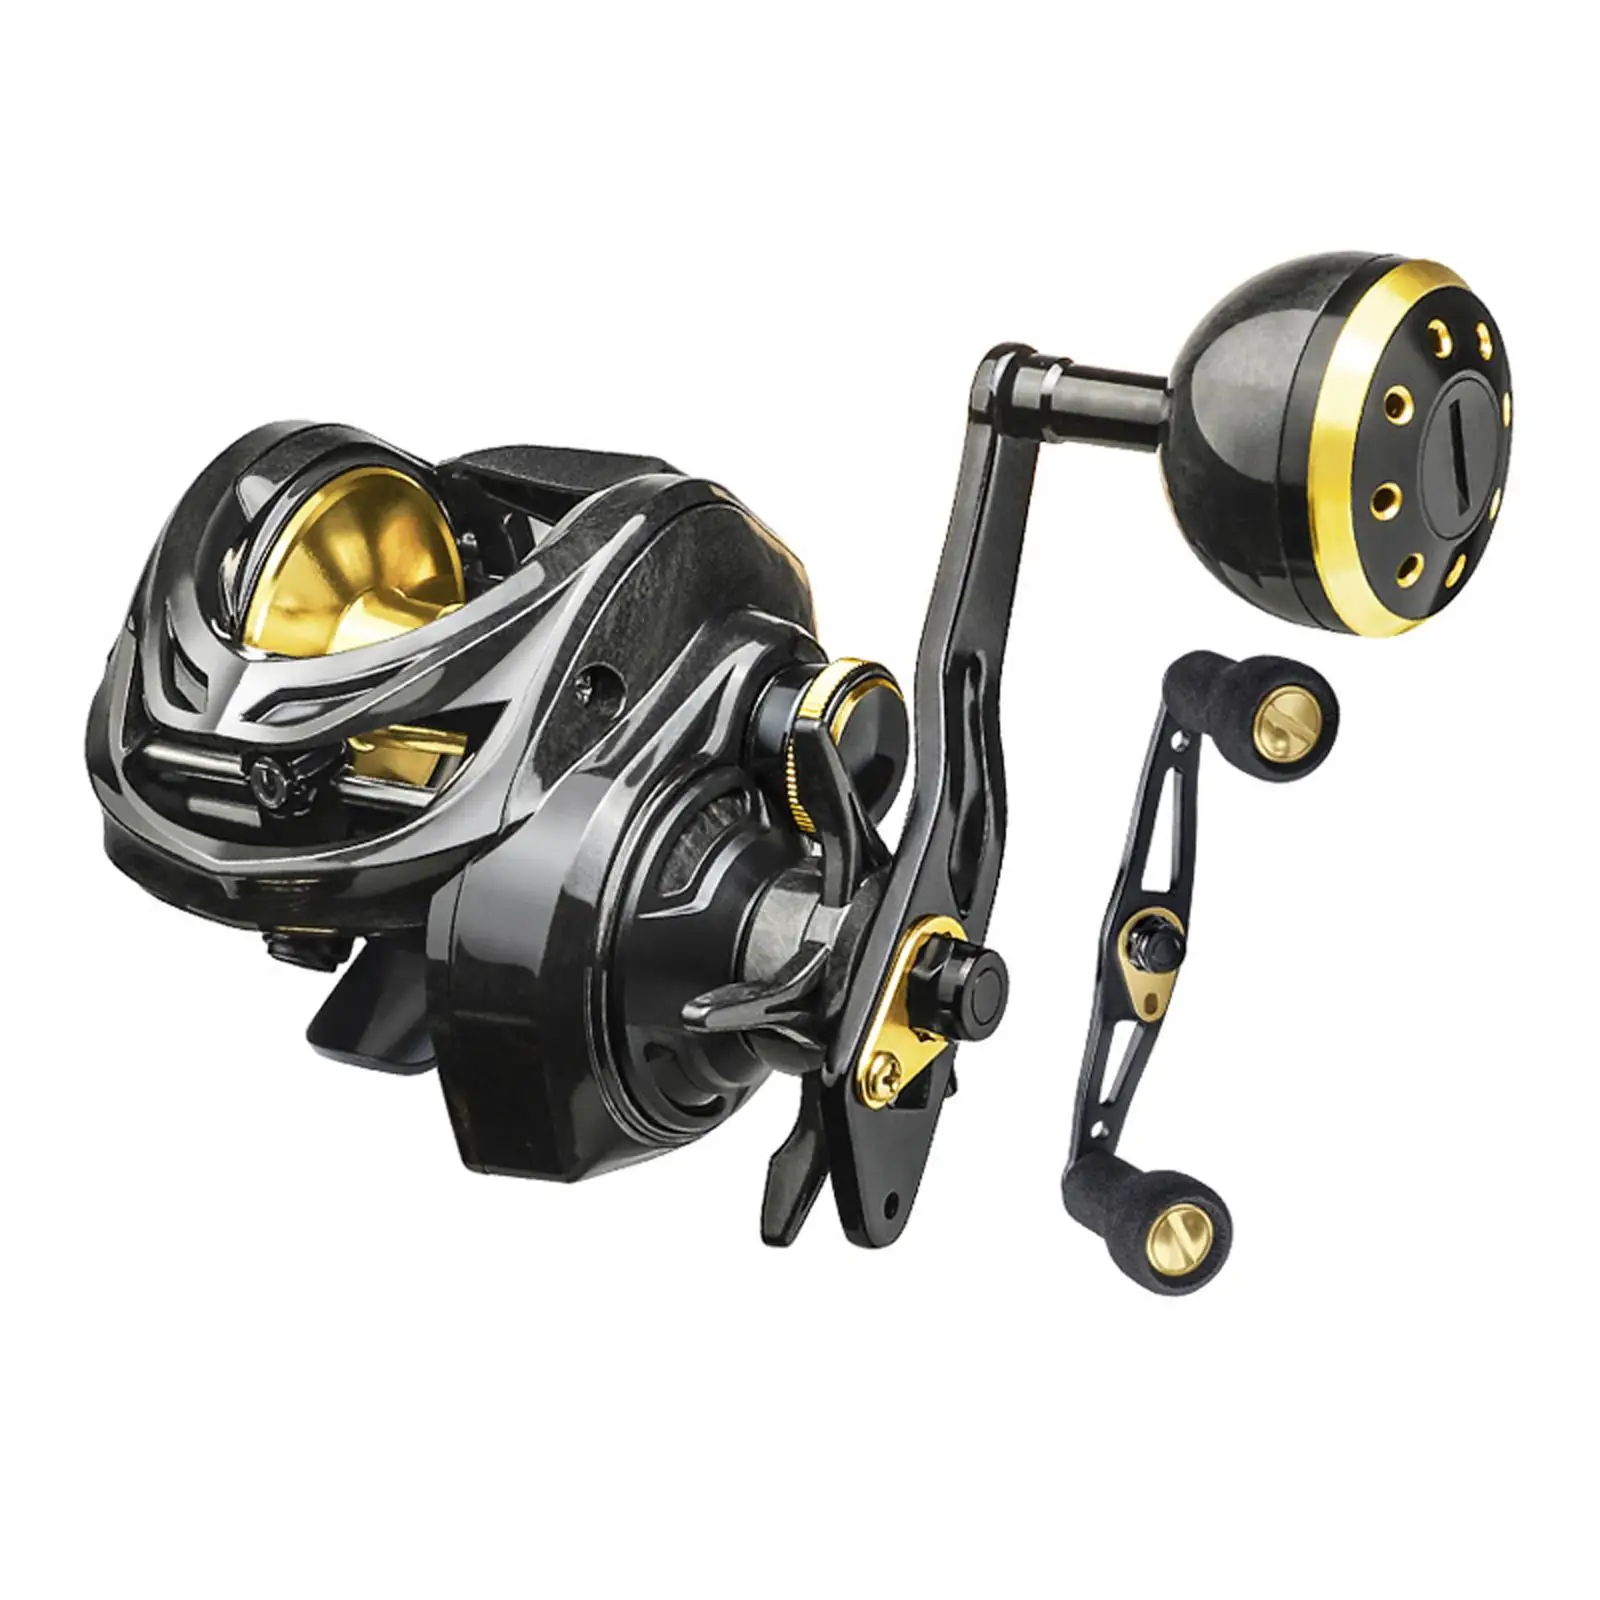 6.3:1 Gear Ratio Casting Speed N48 Level Brakecaster Reelcasting